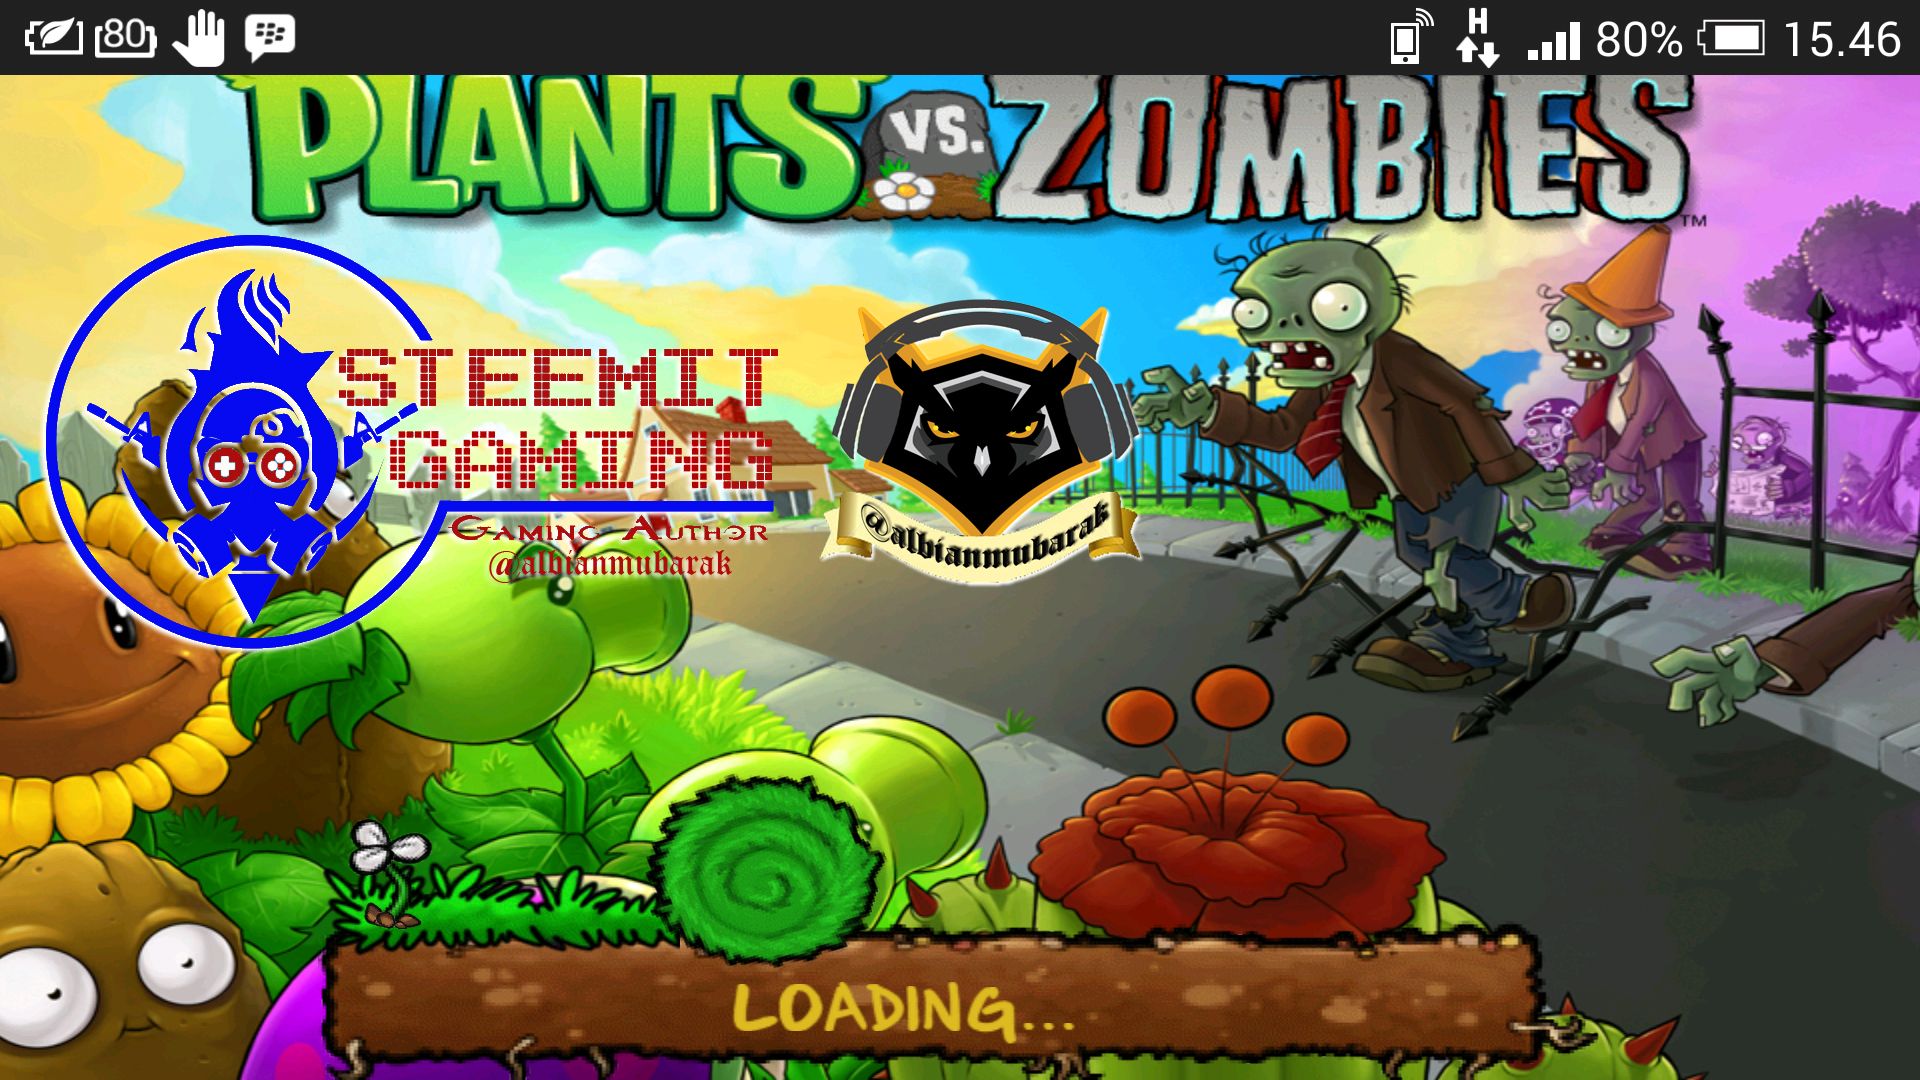 Plants vs zombies game of the year русификатор steam фото 29